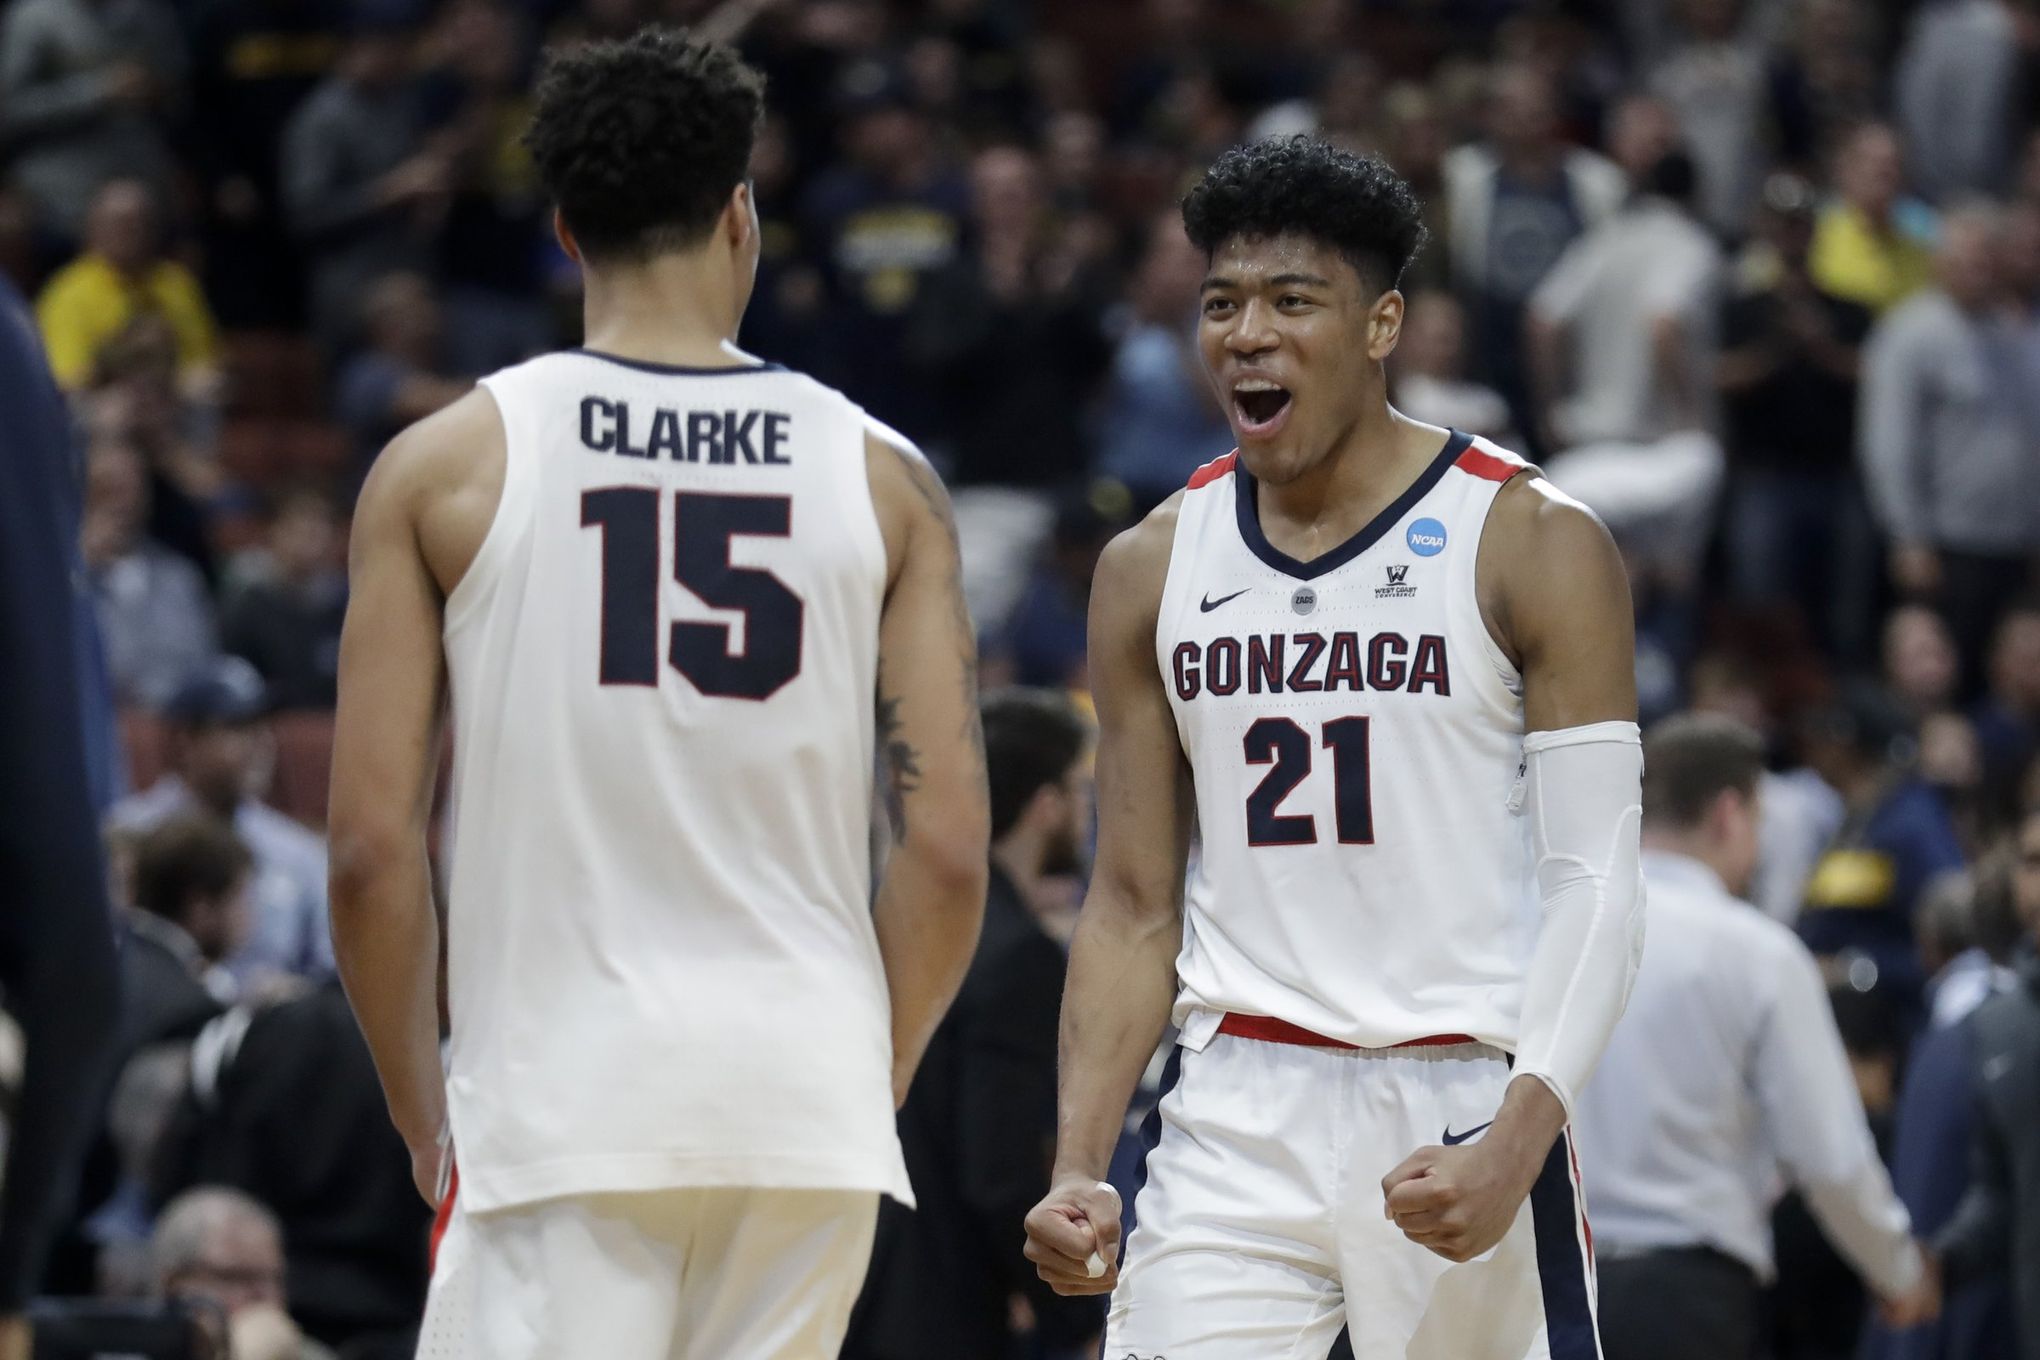 Where will Gonzaga's Rui Hachimura and Brandon Clarke go in the NBA draft  if they decide to turn pro?